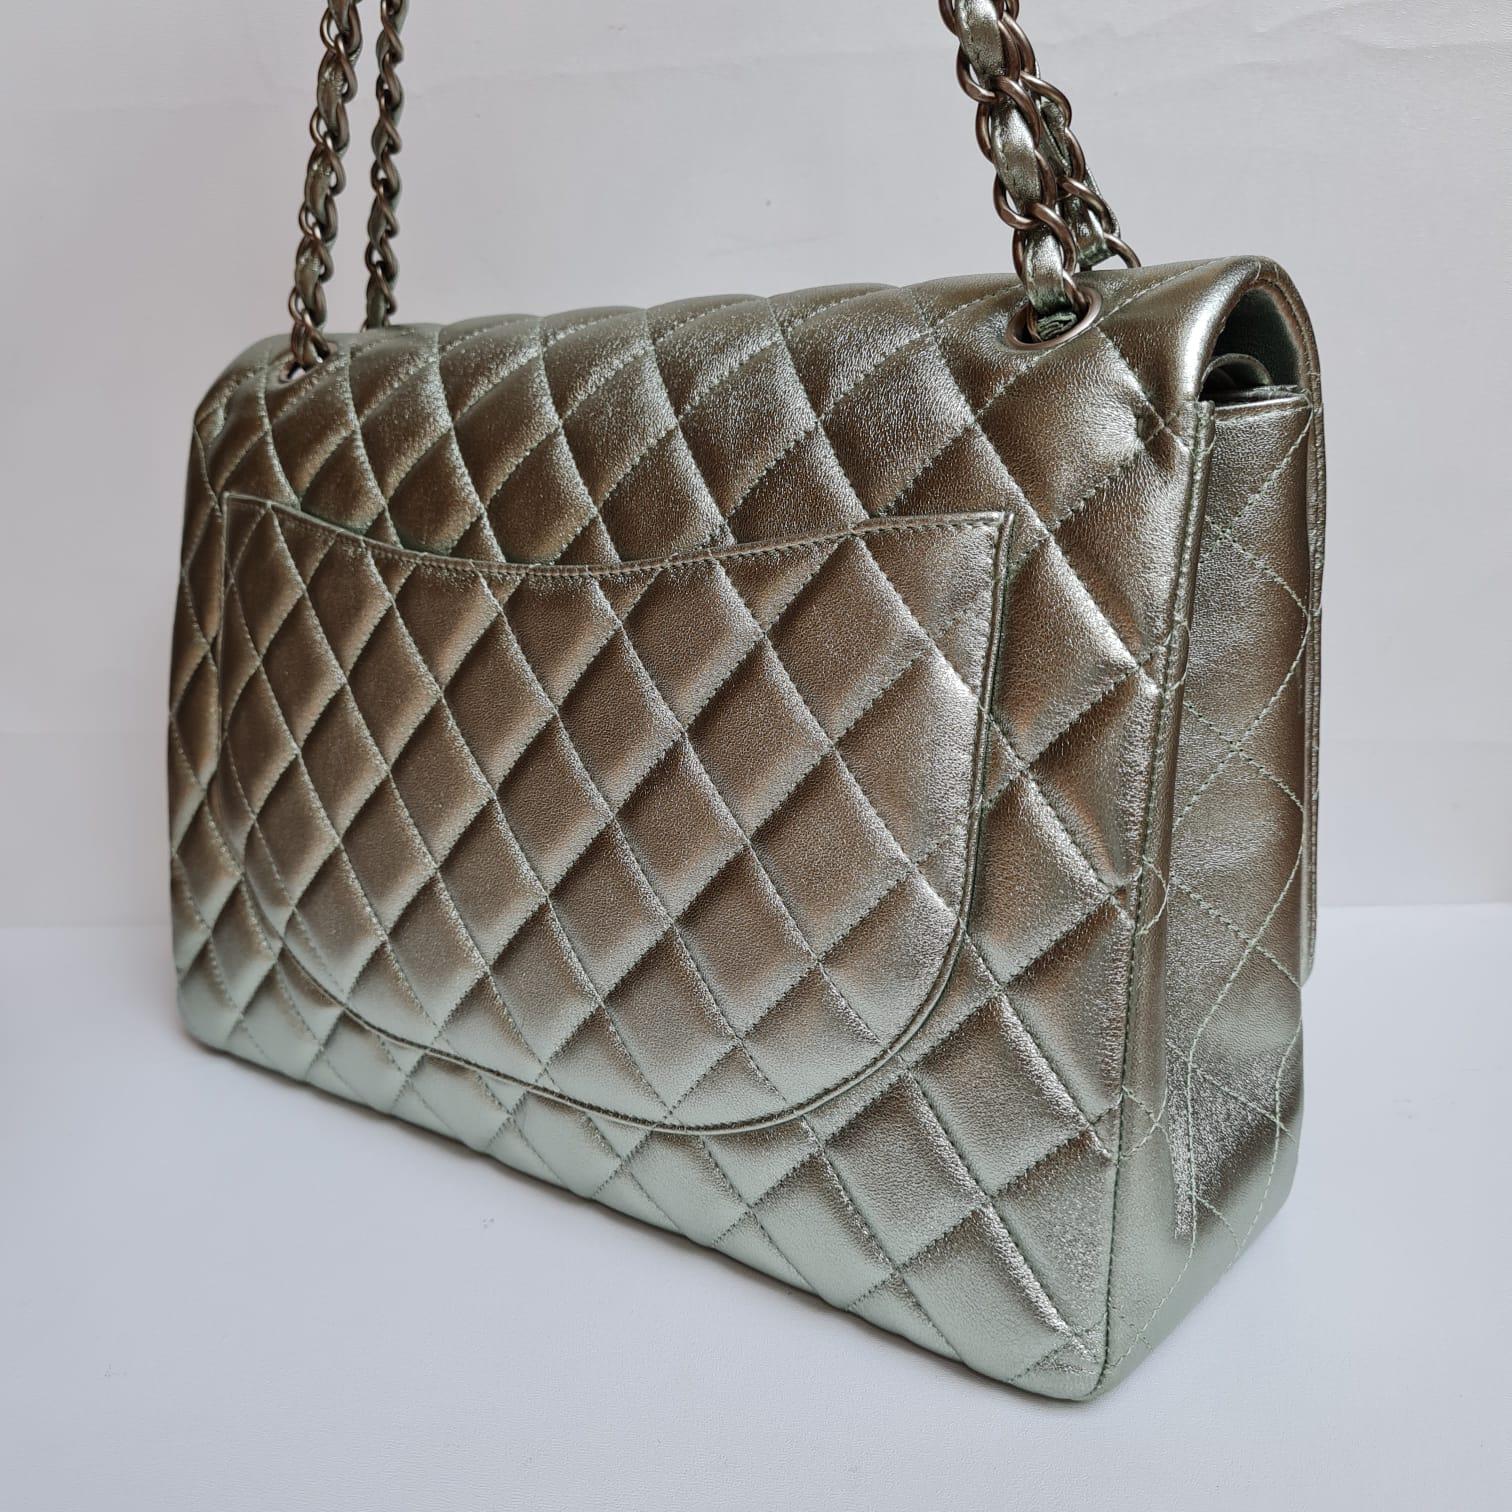 Chanel Silver Metallic Lambskin Quilted Maxi Double Flap Bag 14